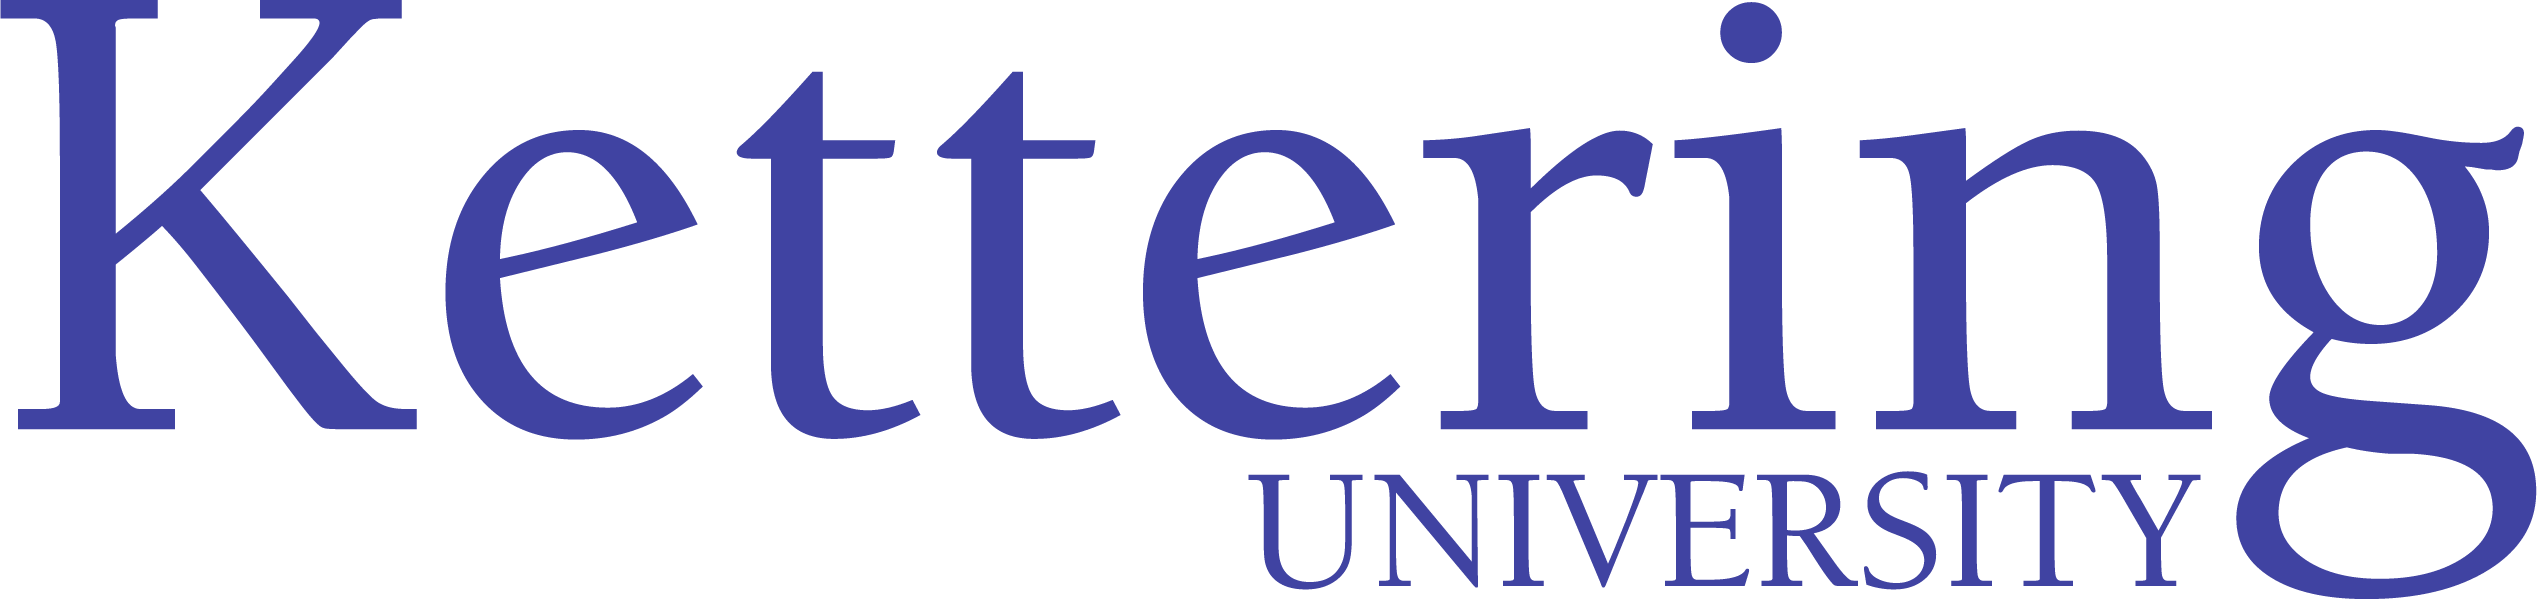 Kettering University logo in the color purple